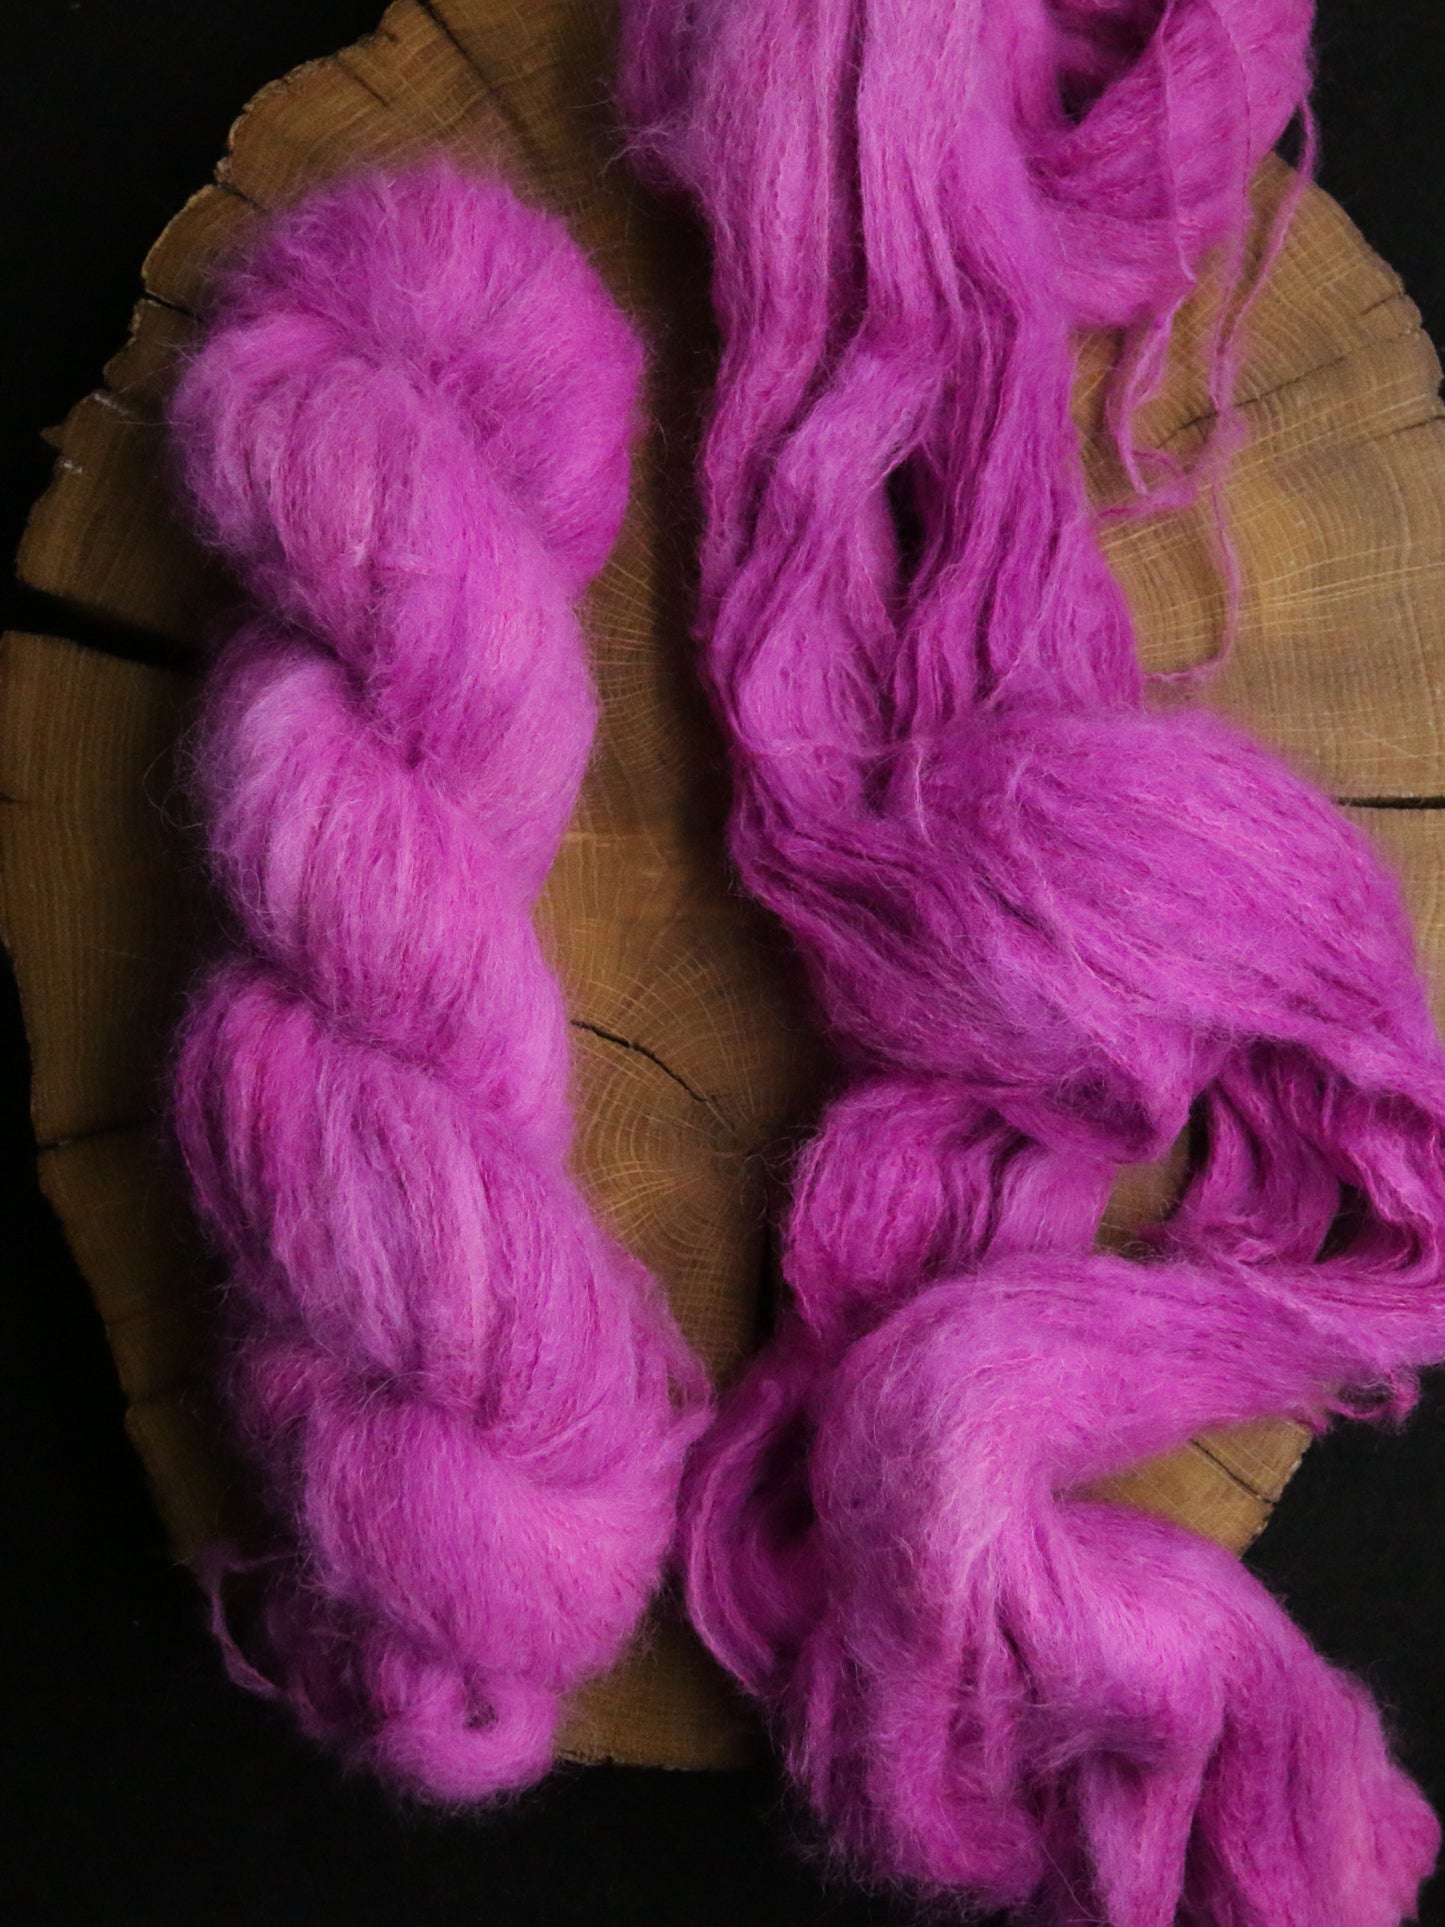 Blueberry Stain - Suri Alpaca Lace - Lace Weight